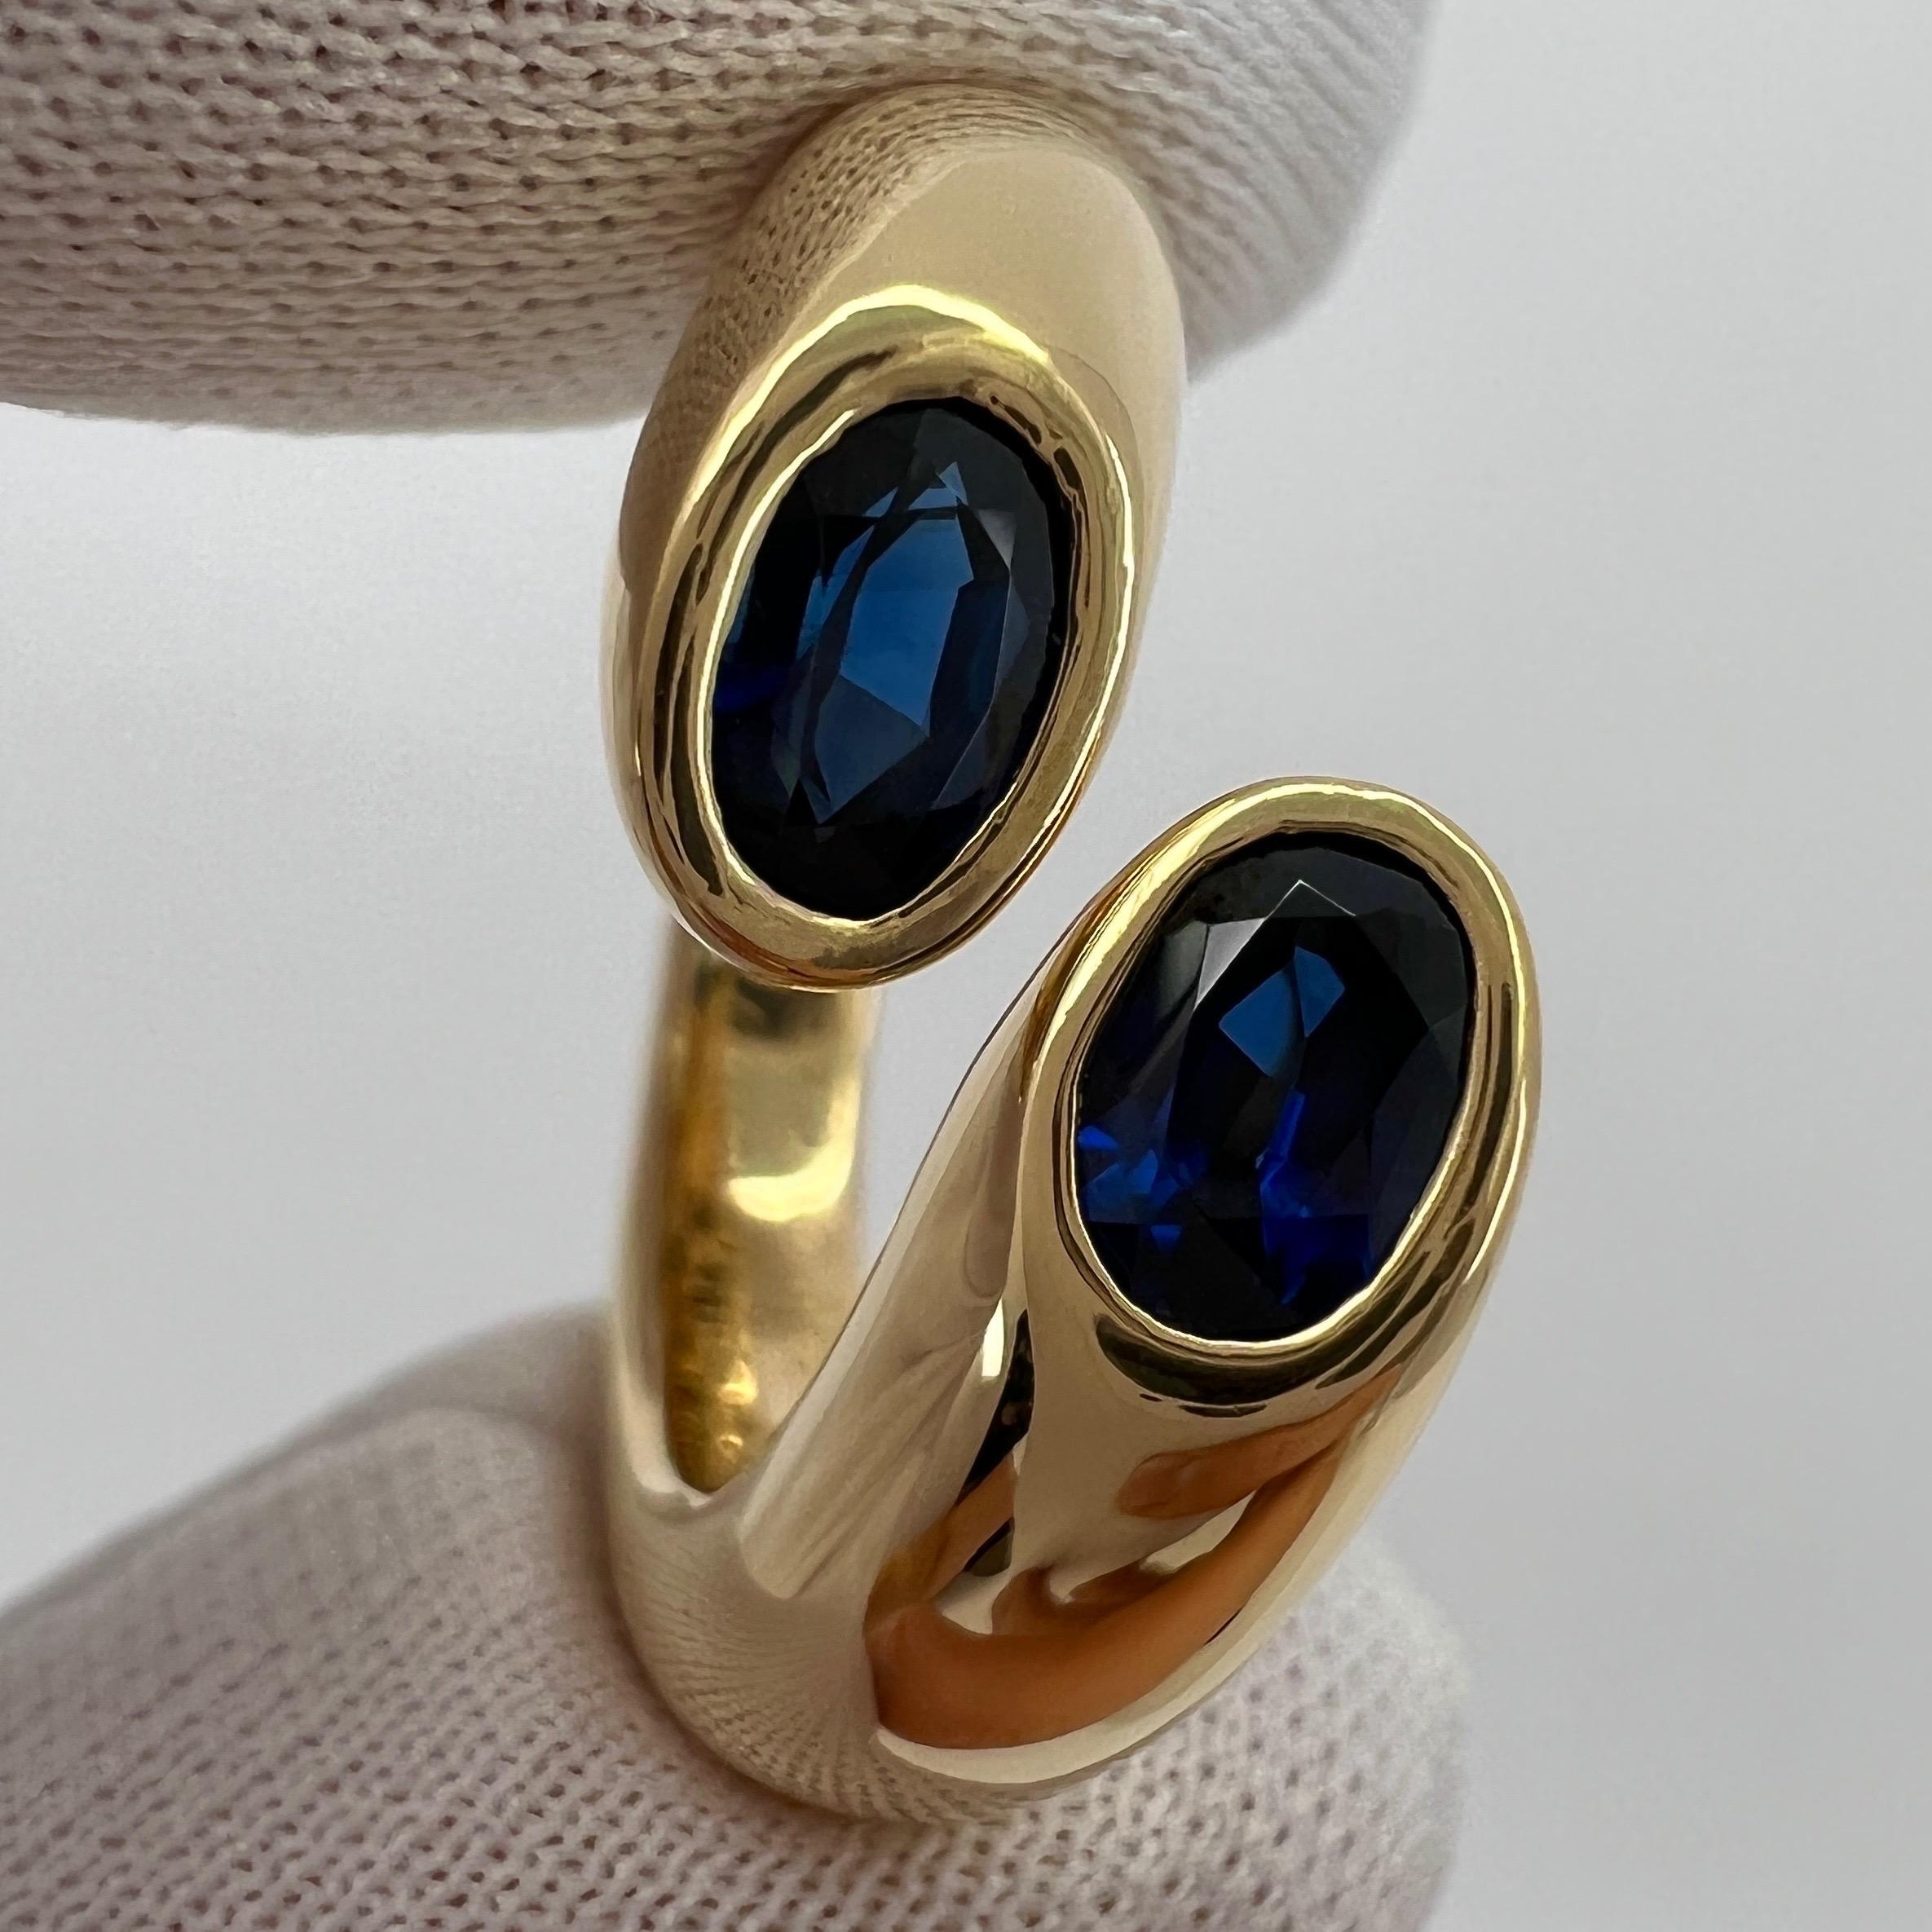 Rare Vintage Cartier Deep Blue Sapphire 18k Yellow Gold Bypass Ring.

Stunning yellow gold ring set with 2 fine deep blue oval cut sapphires. Fine jewellery houses like Cartier only use the finest of gemstones and these sapphires are no exception. 2